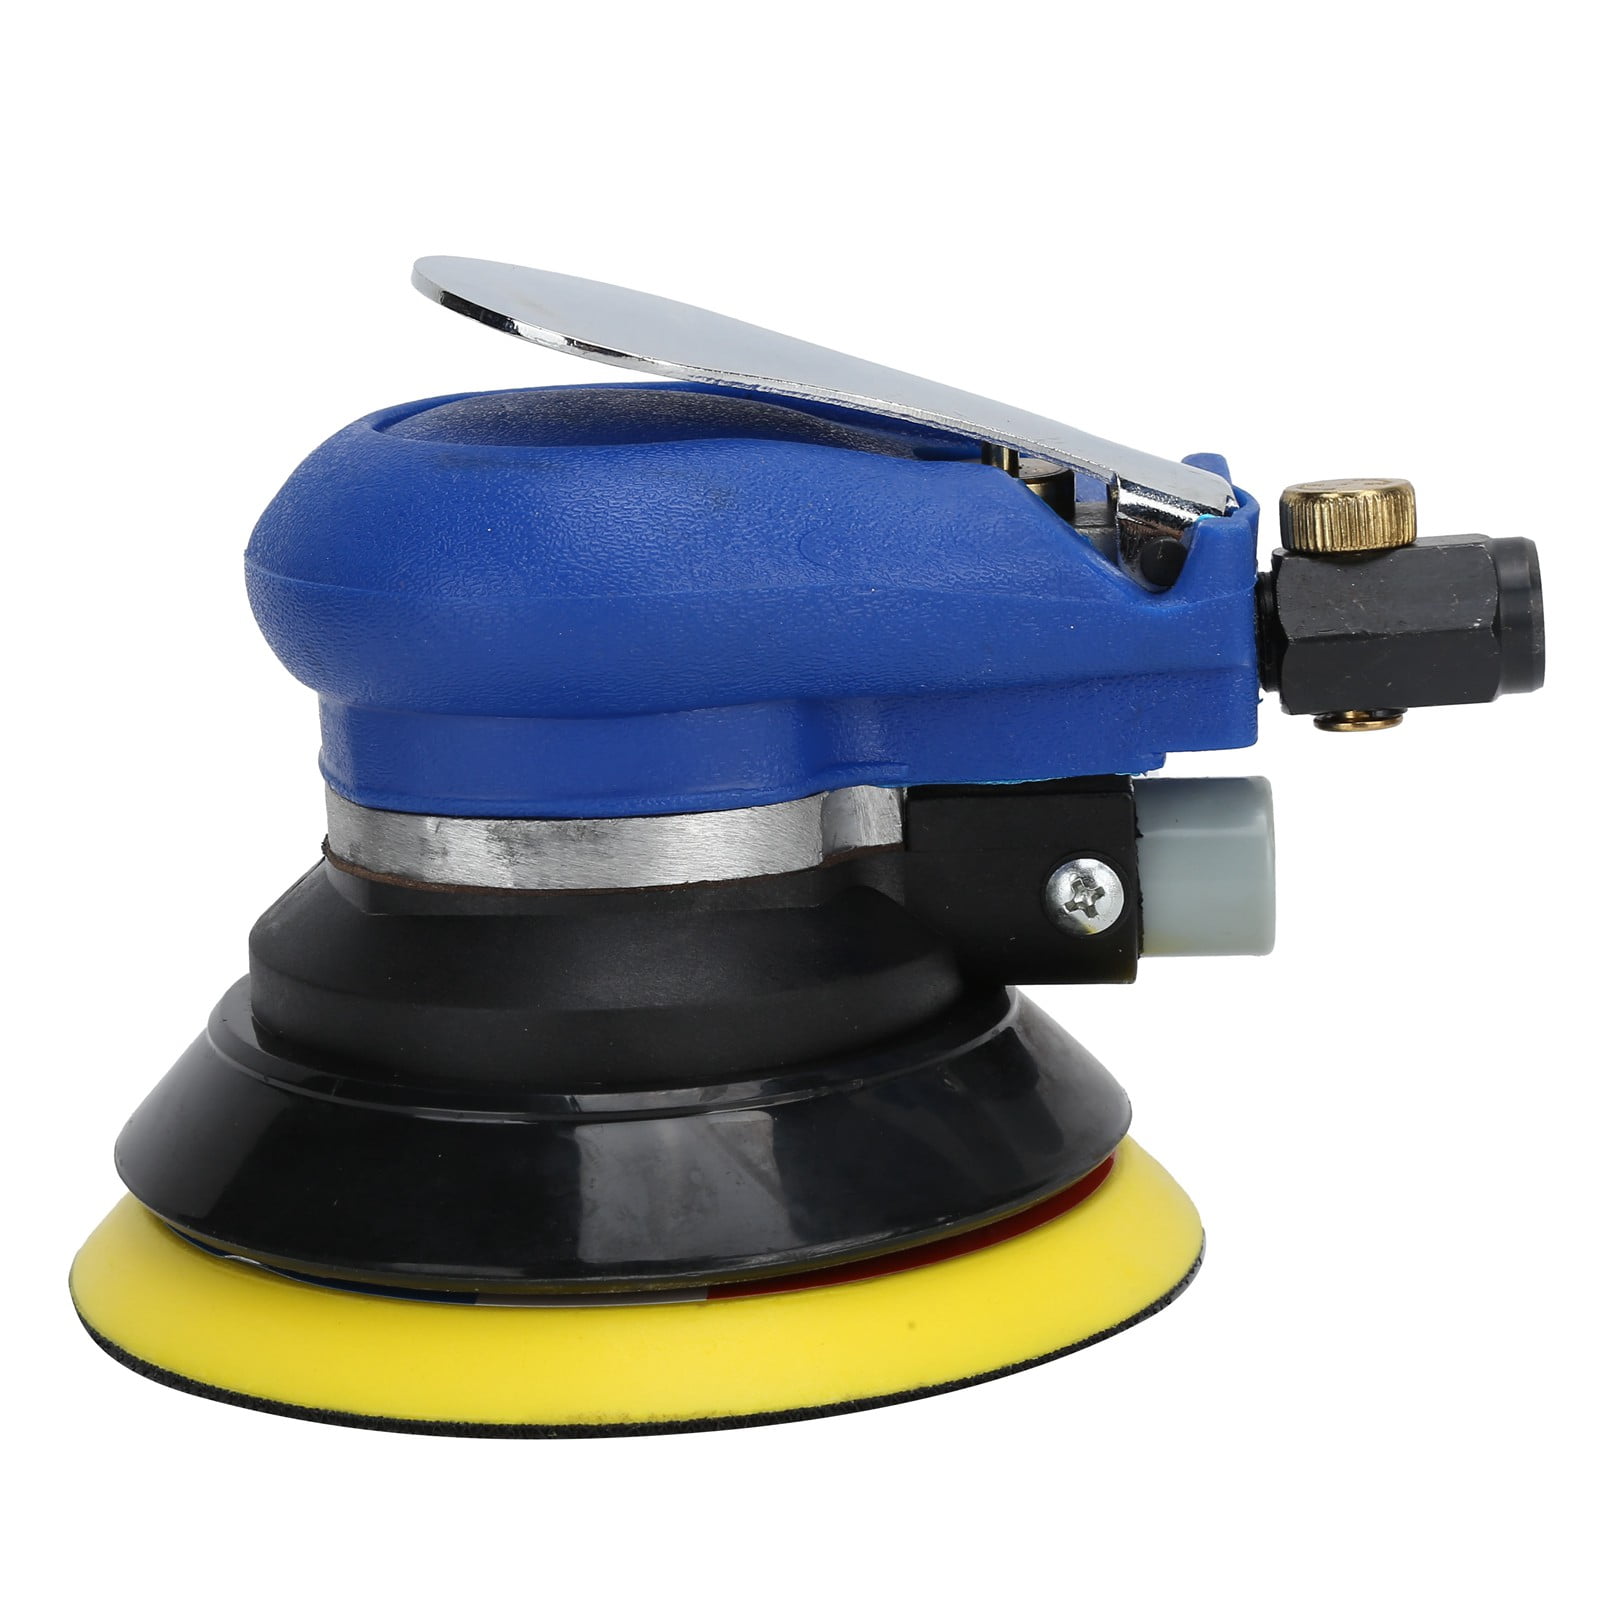 Grinding Machine Adjustable Suitable for Glass Fiber and Other Composite Materials Air Sander 